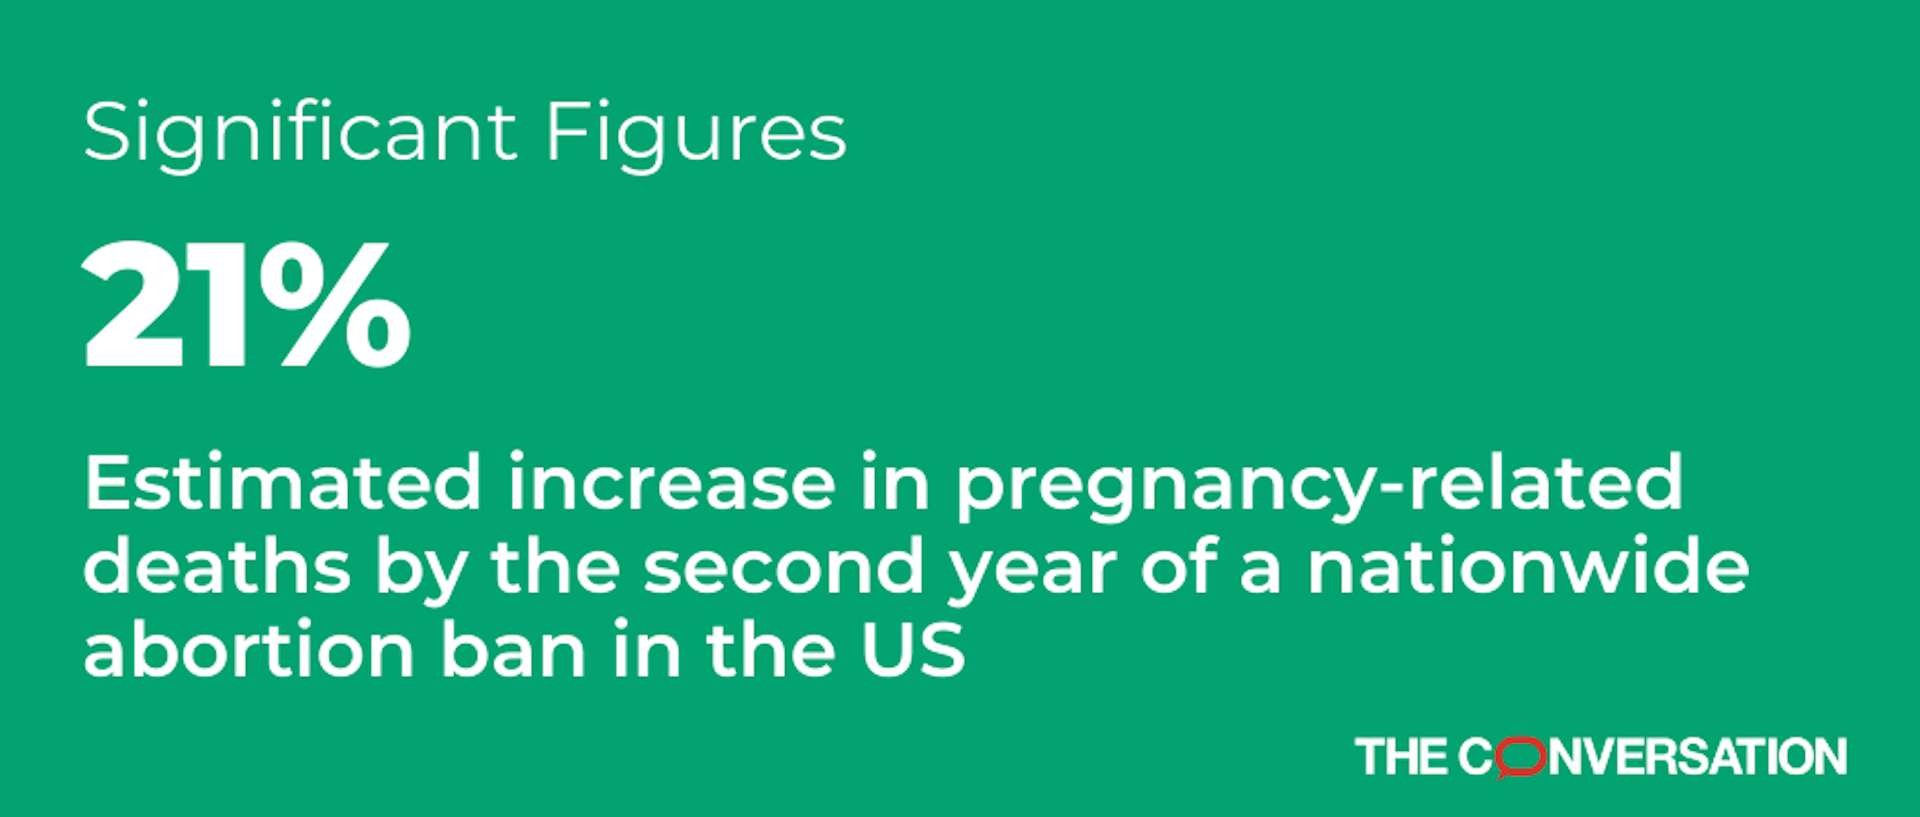 White text on green background stating '21%: Estimated increase in pregnancy-related deaths by the second year of a nationwide abortion ban in the US.'